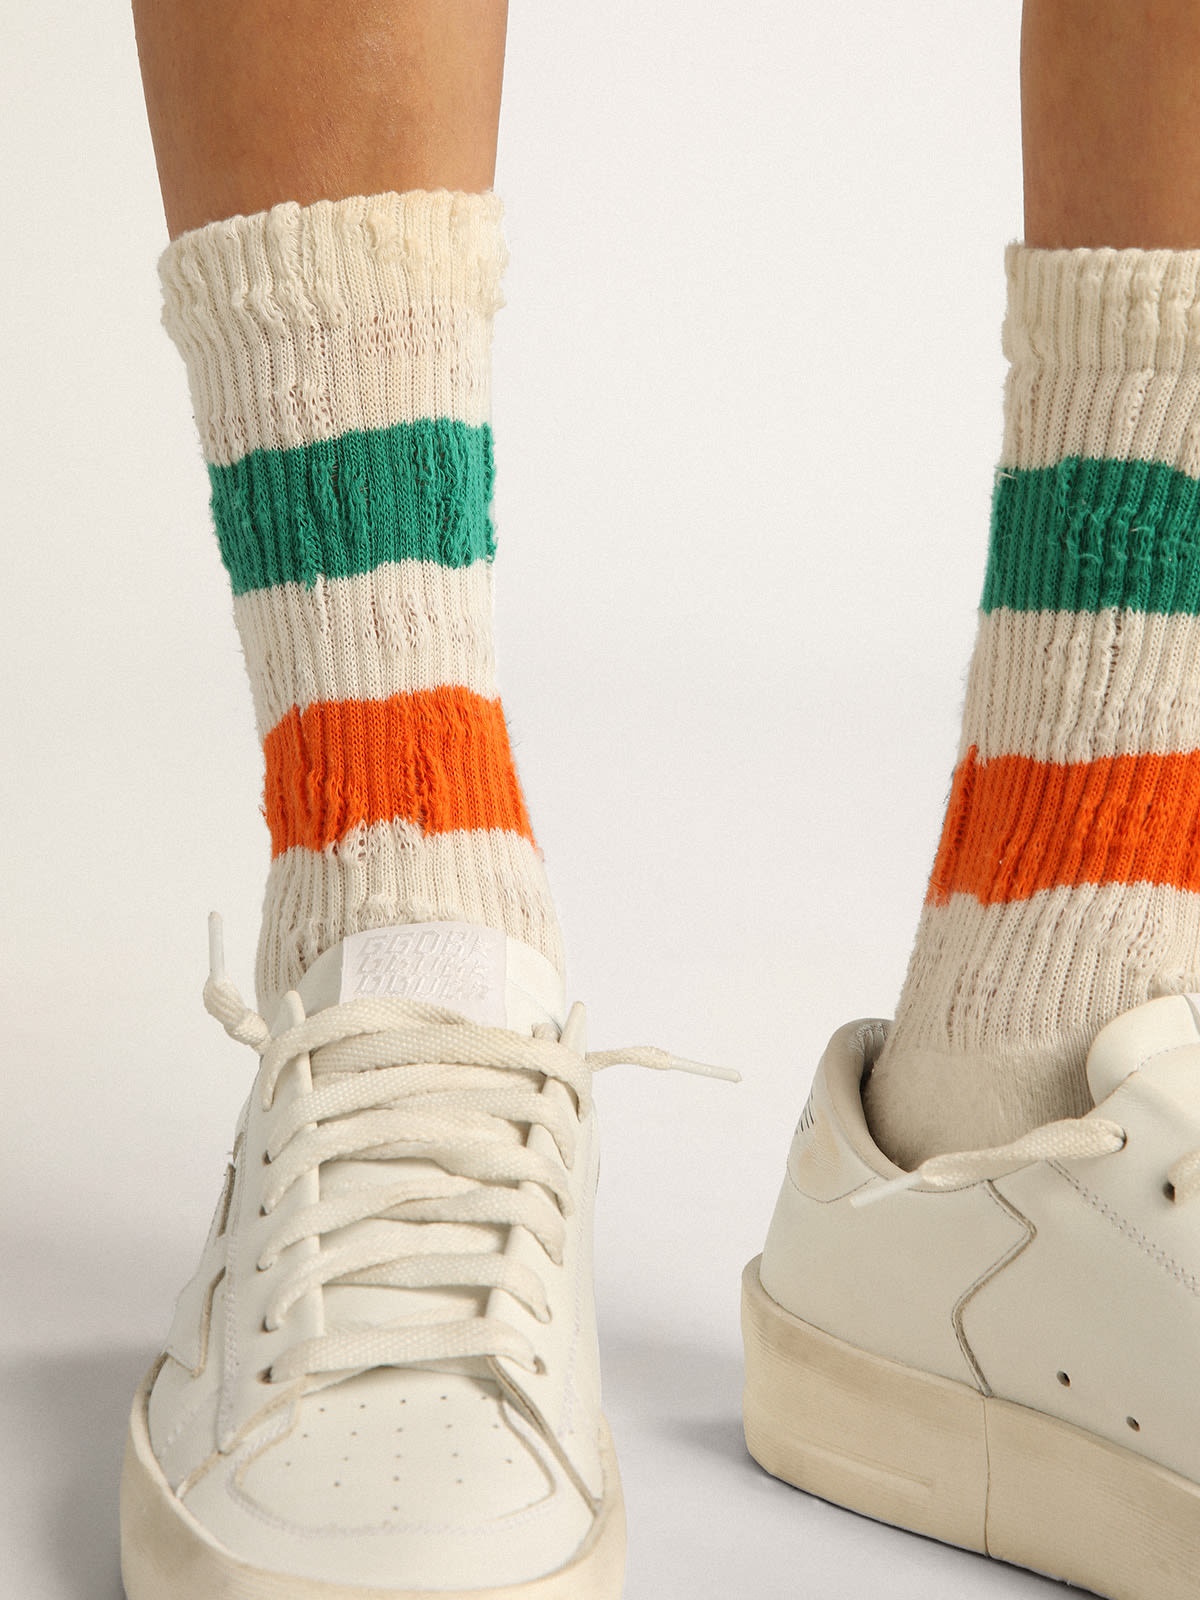 Distressed-finish white socks with green and orange stripes - 3